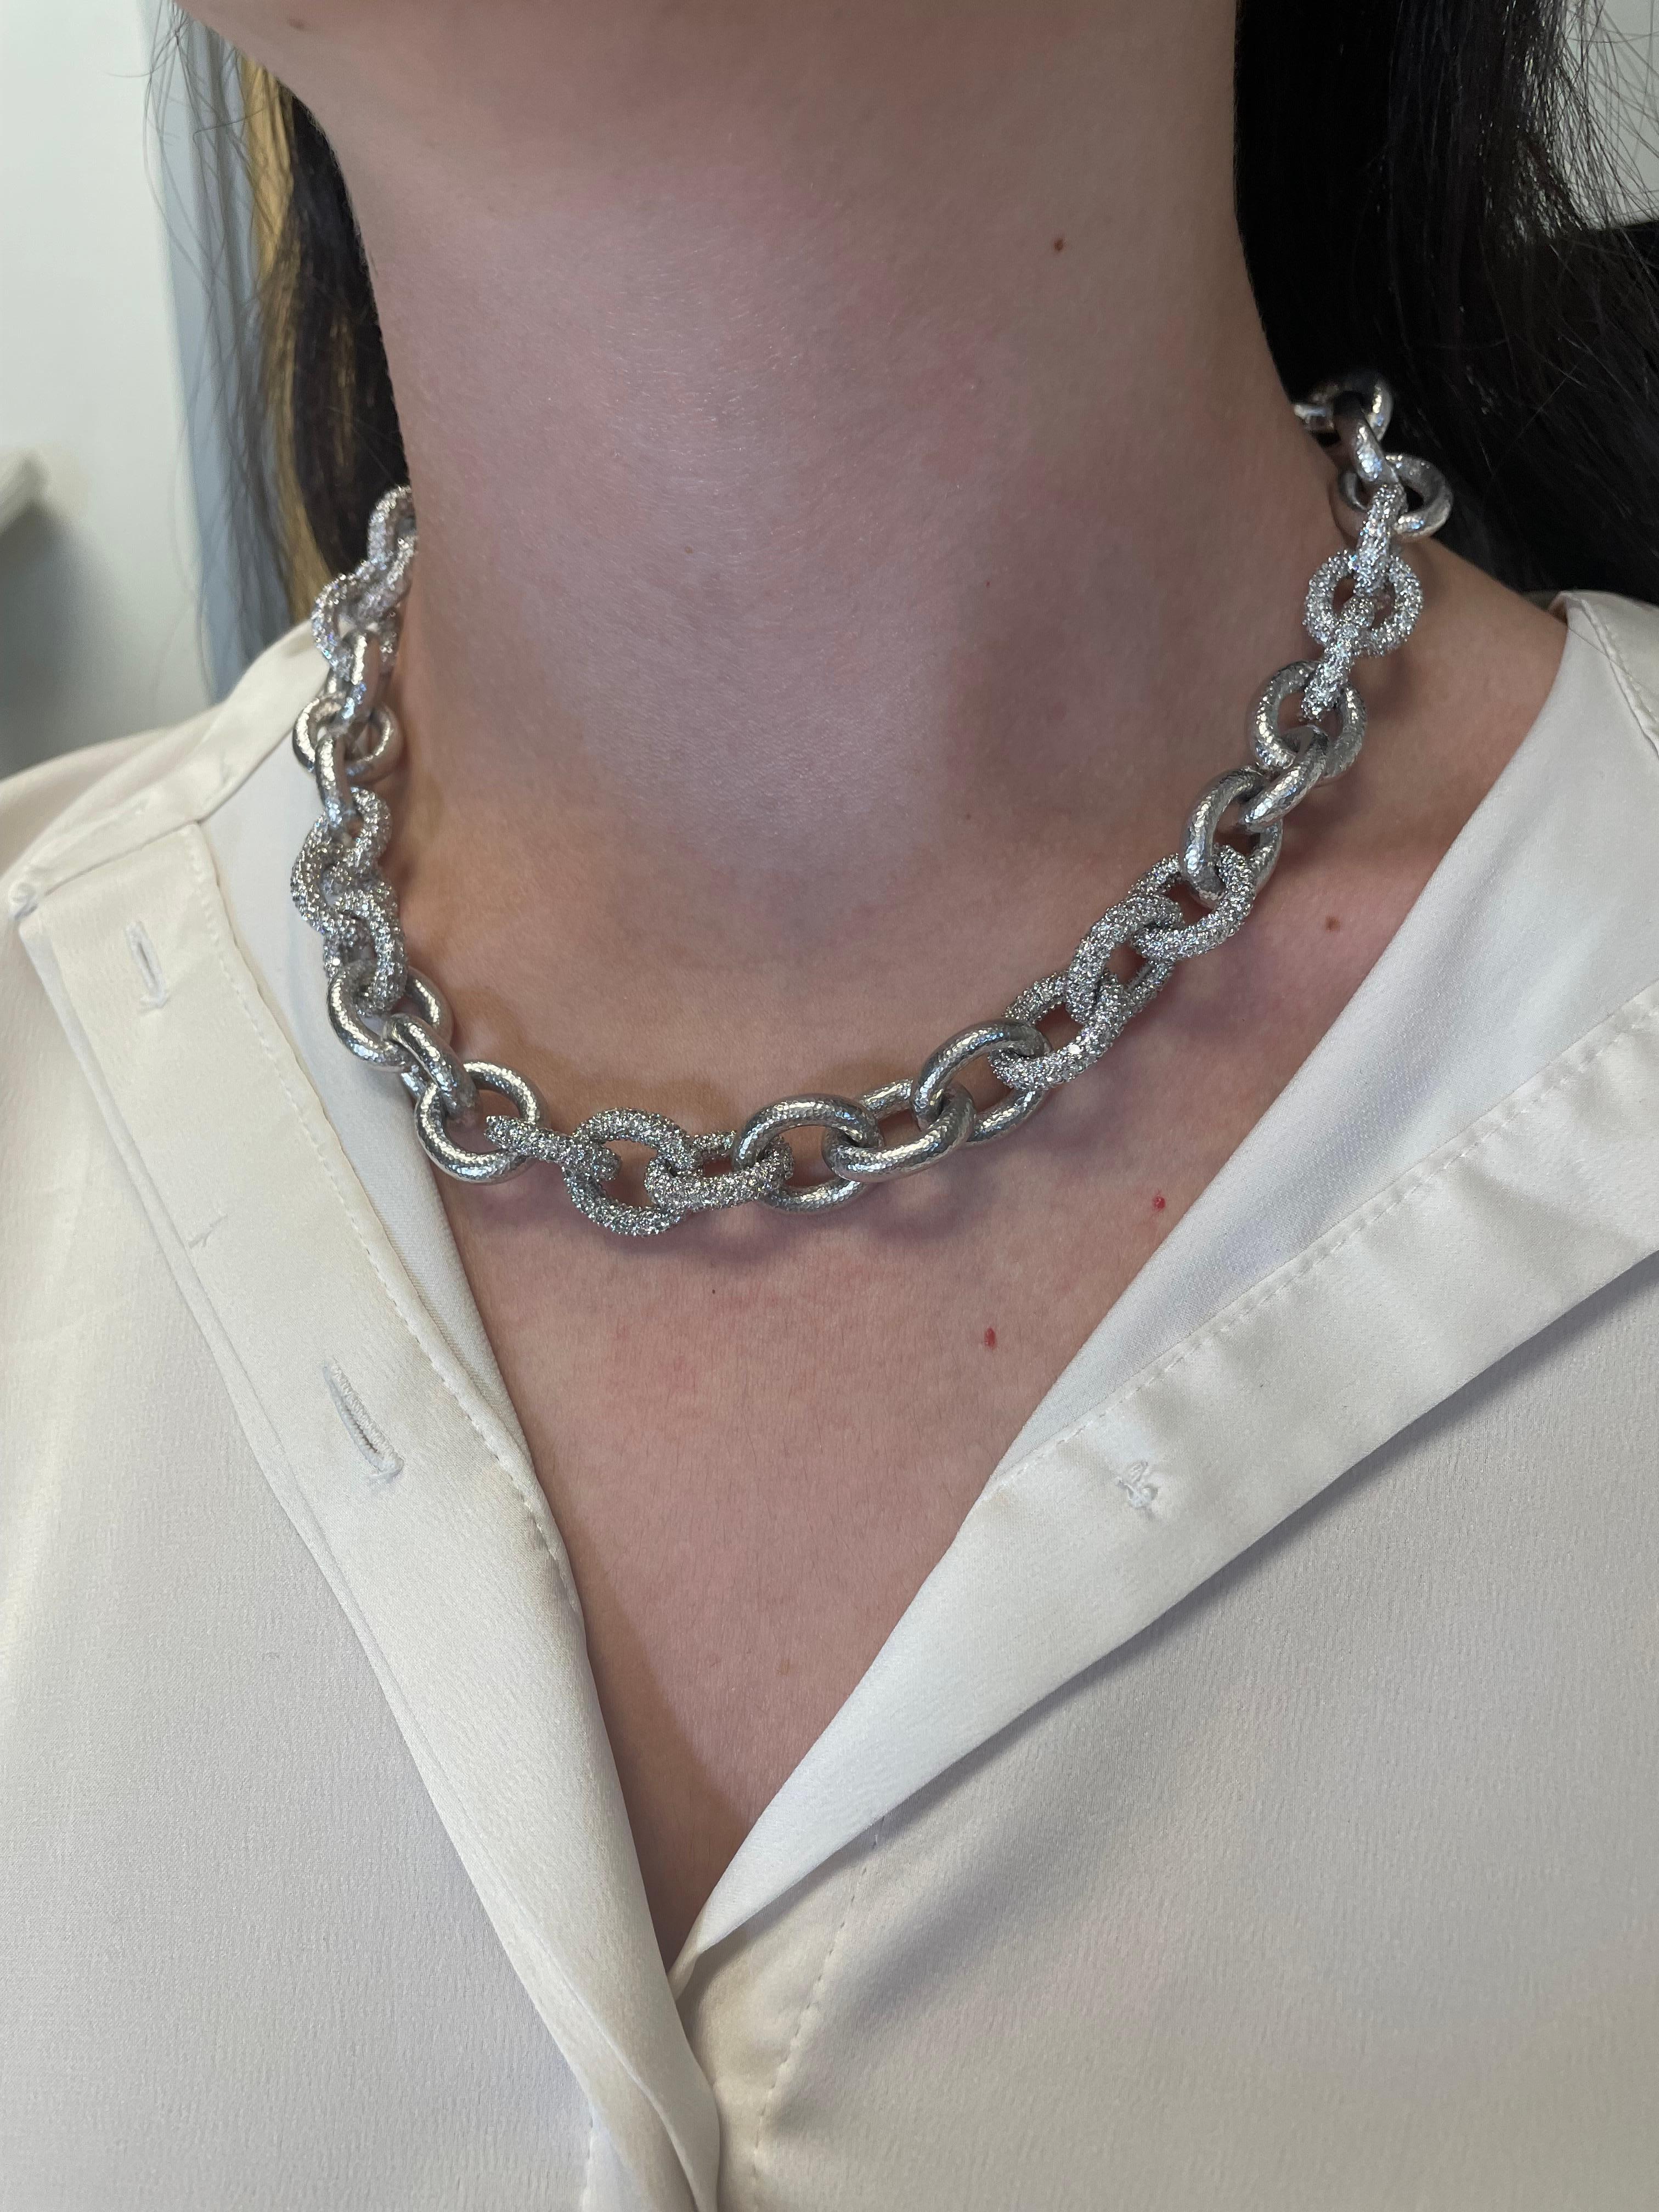 Grand diamond chain necklace. Every three links pave set with diamonds, every other three hammer finished.
1260 round brilliant diamonds, 24.27 carats. Approximately G/H color and SI clarity. 18-karat white gold, 115.42 grams. 18in
Accommodated with